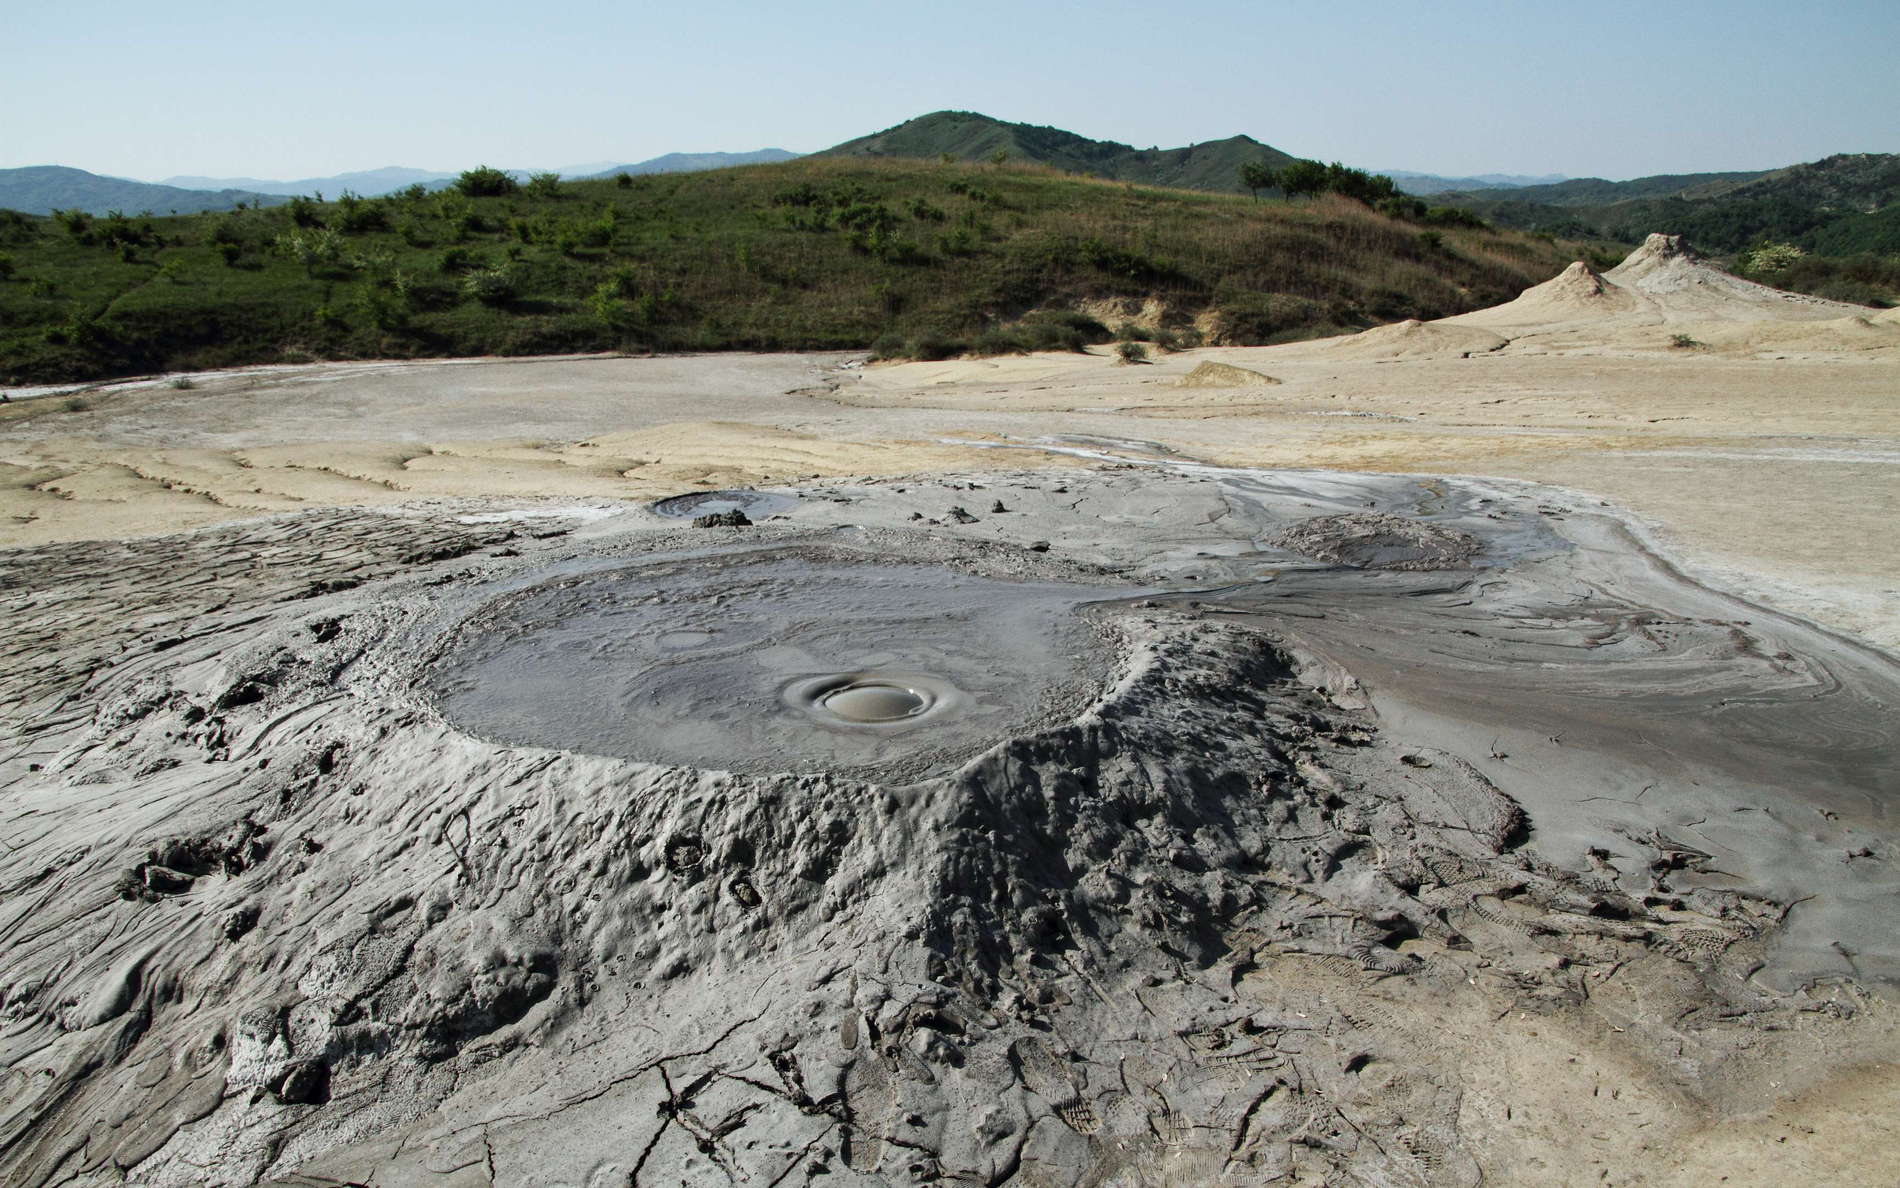 Pâclele Mici  |  Mud volcano with outflow